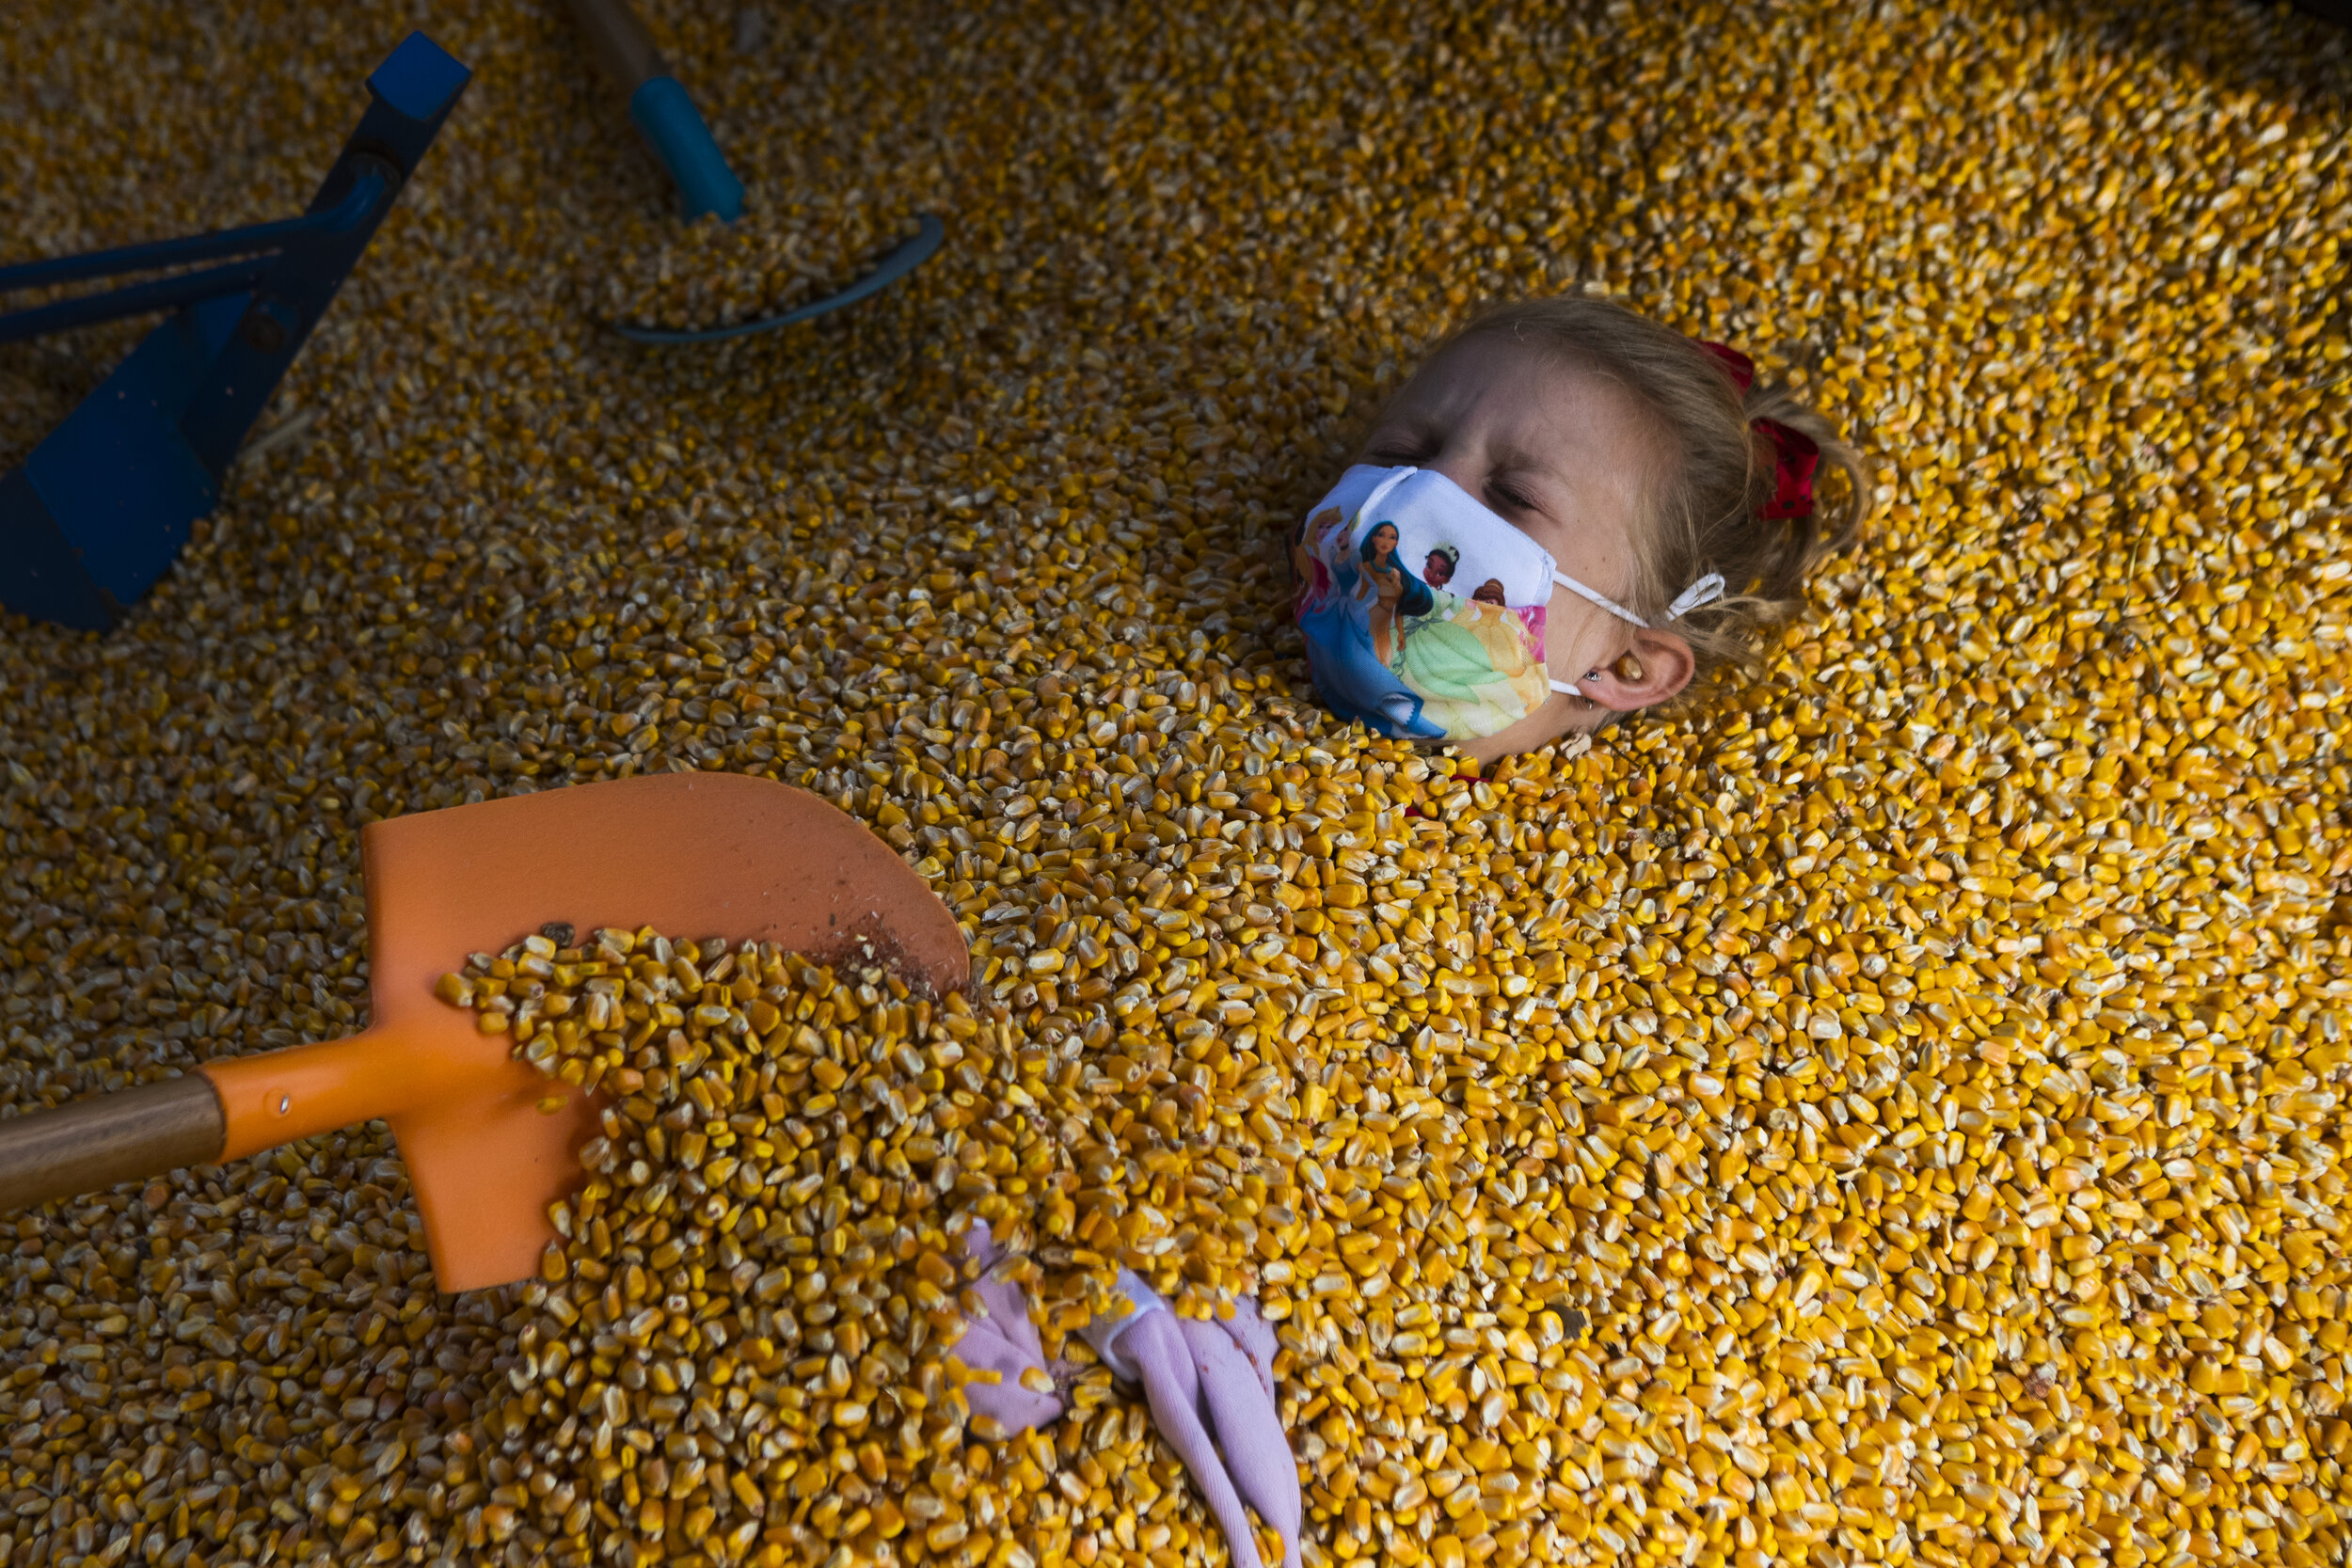  Mickenna Korbel is buried up to her neck in corn kernels by her mother Mindy Korbel, and Kyler Korbel at the Roca Berry Farm on Monday, September 28, 2020, in Roca, Nebraska. Roca Berry Farm opened for the Fall 2020 season on September 19, 2020. KEN